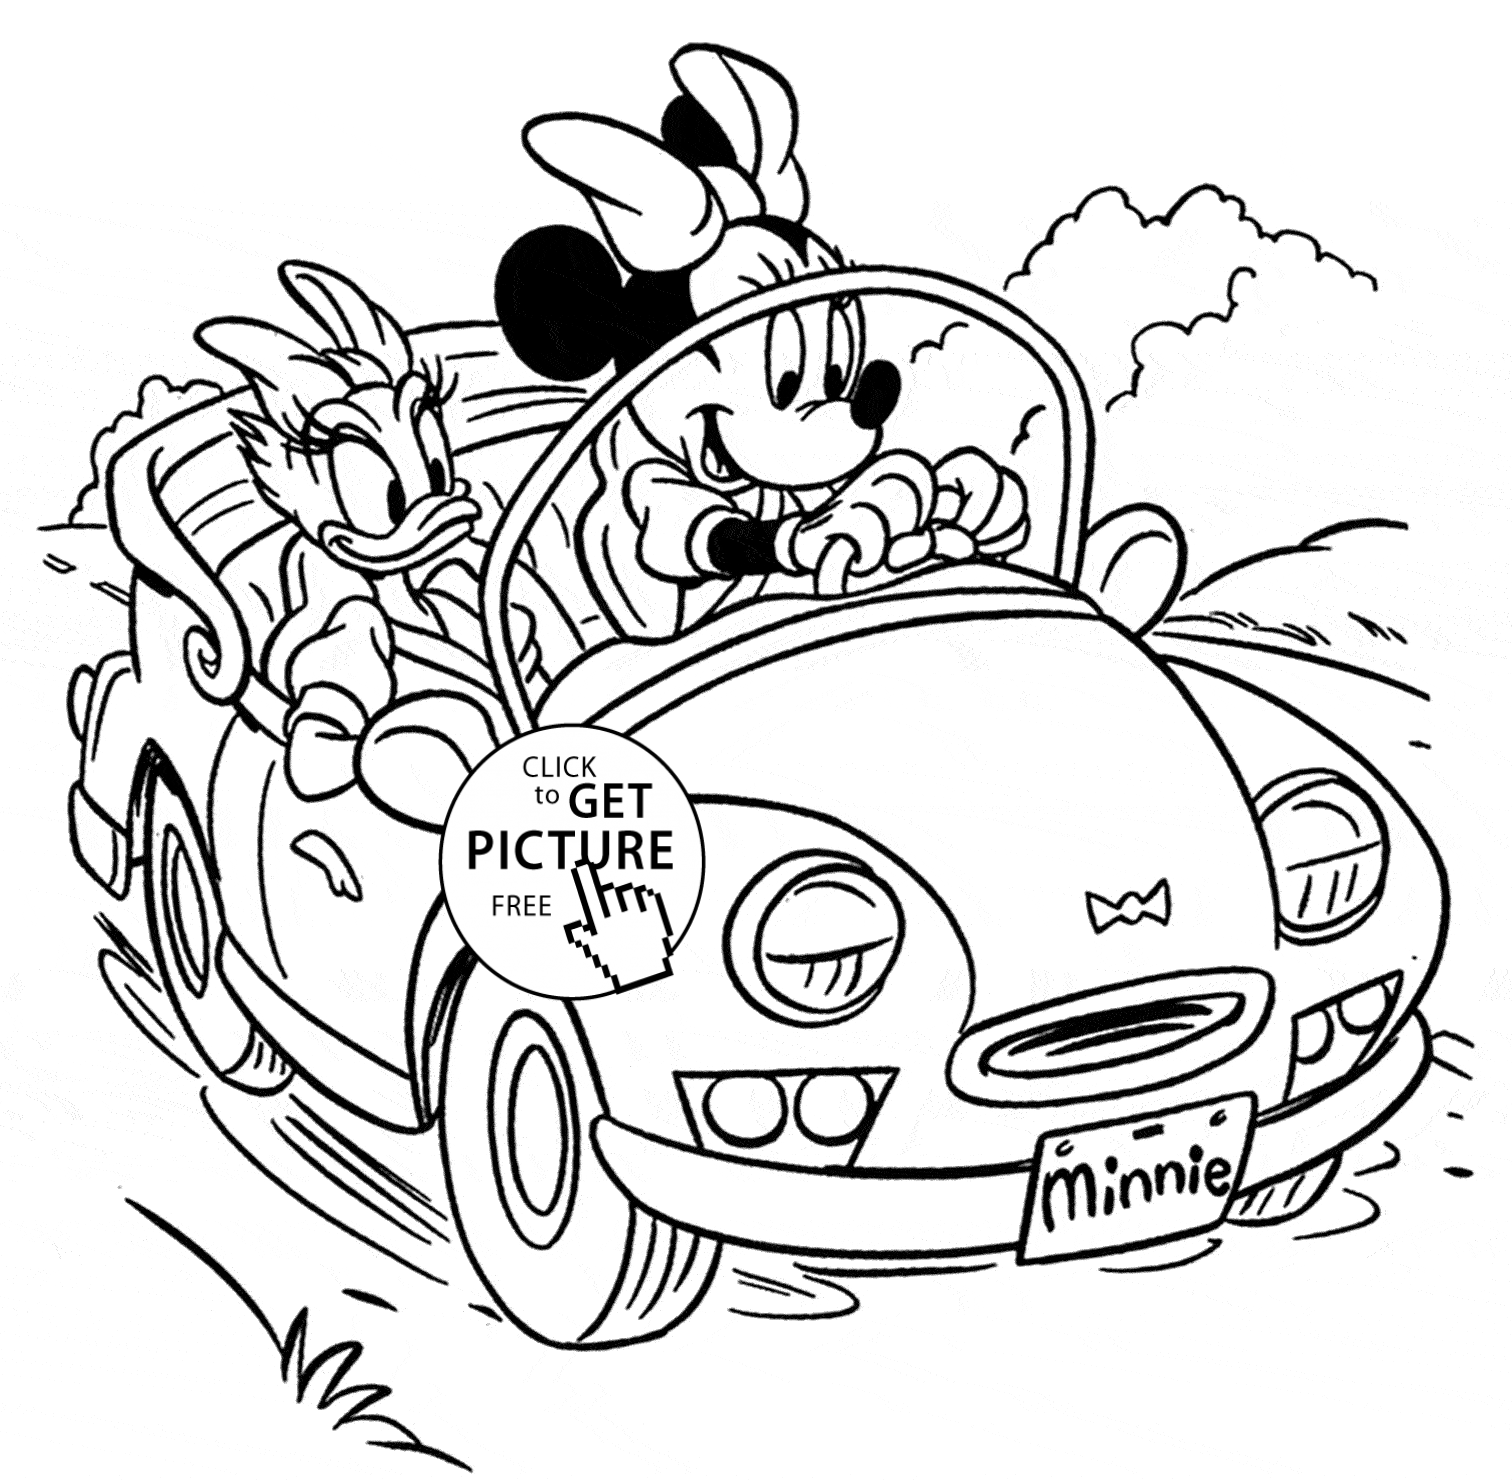 Disney coloring pages free printable, Disney coloring sheets ...